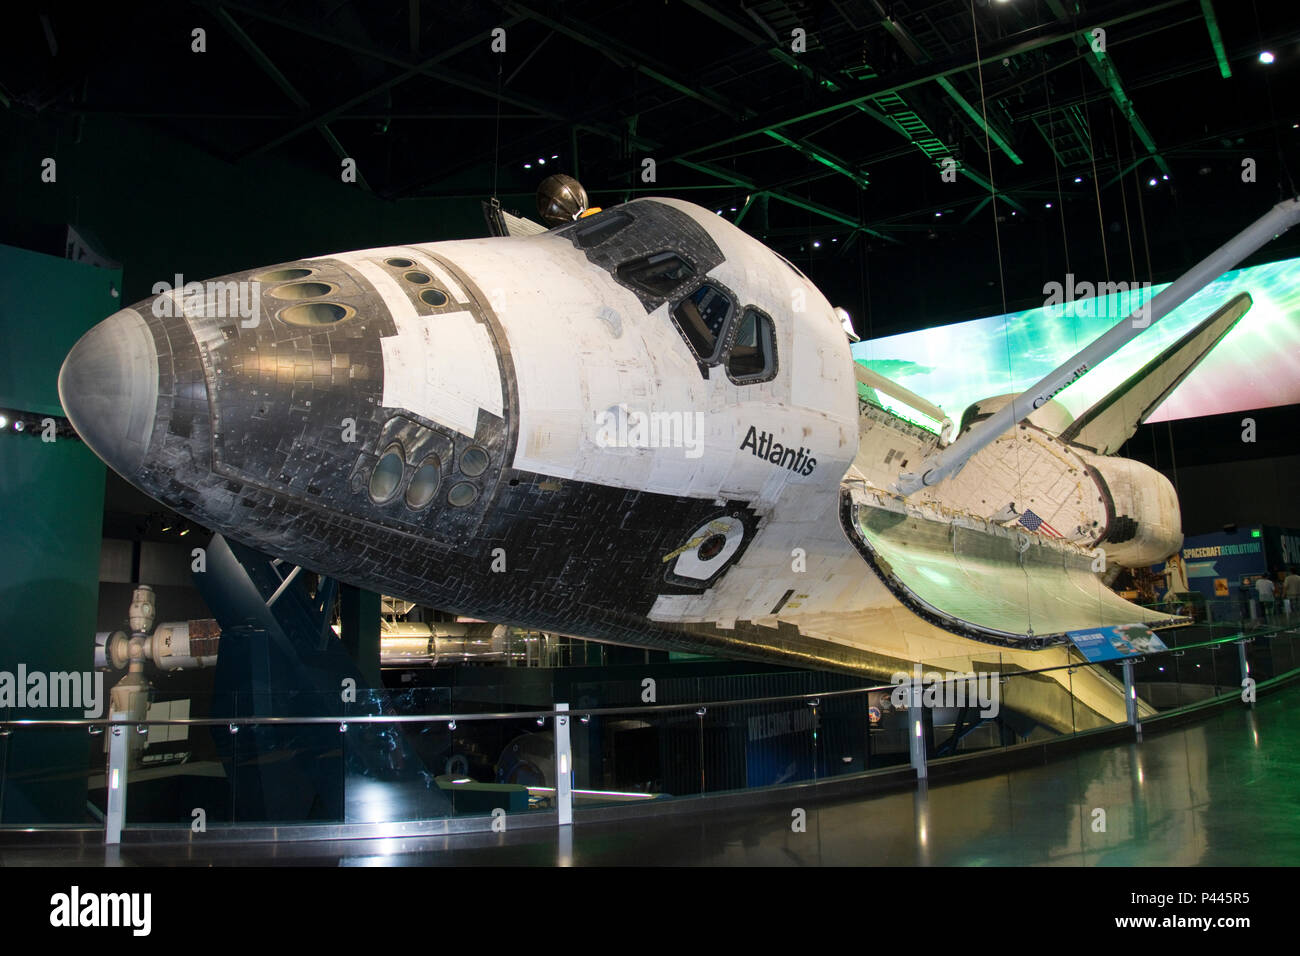 The Space Shuttle Atlantis at NASA's Kennedy Space Center Visitor Complex, Florida. Stock Photo